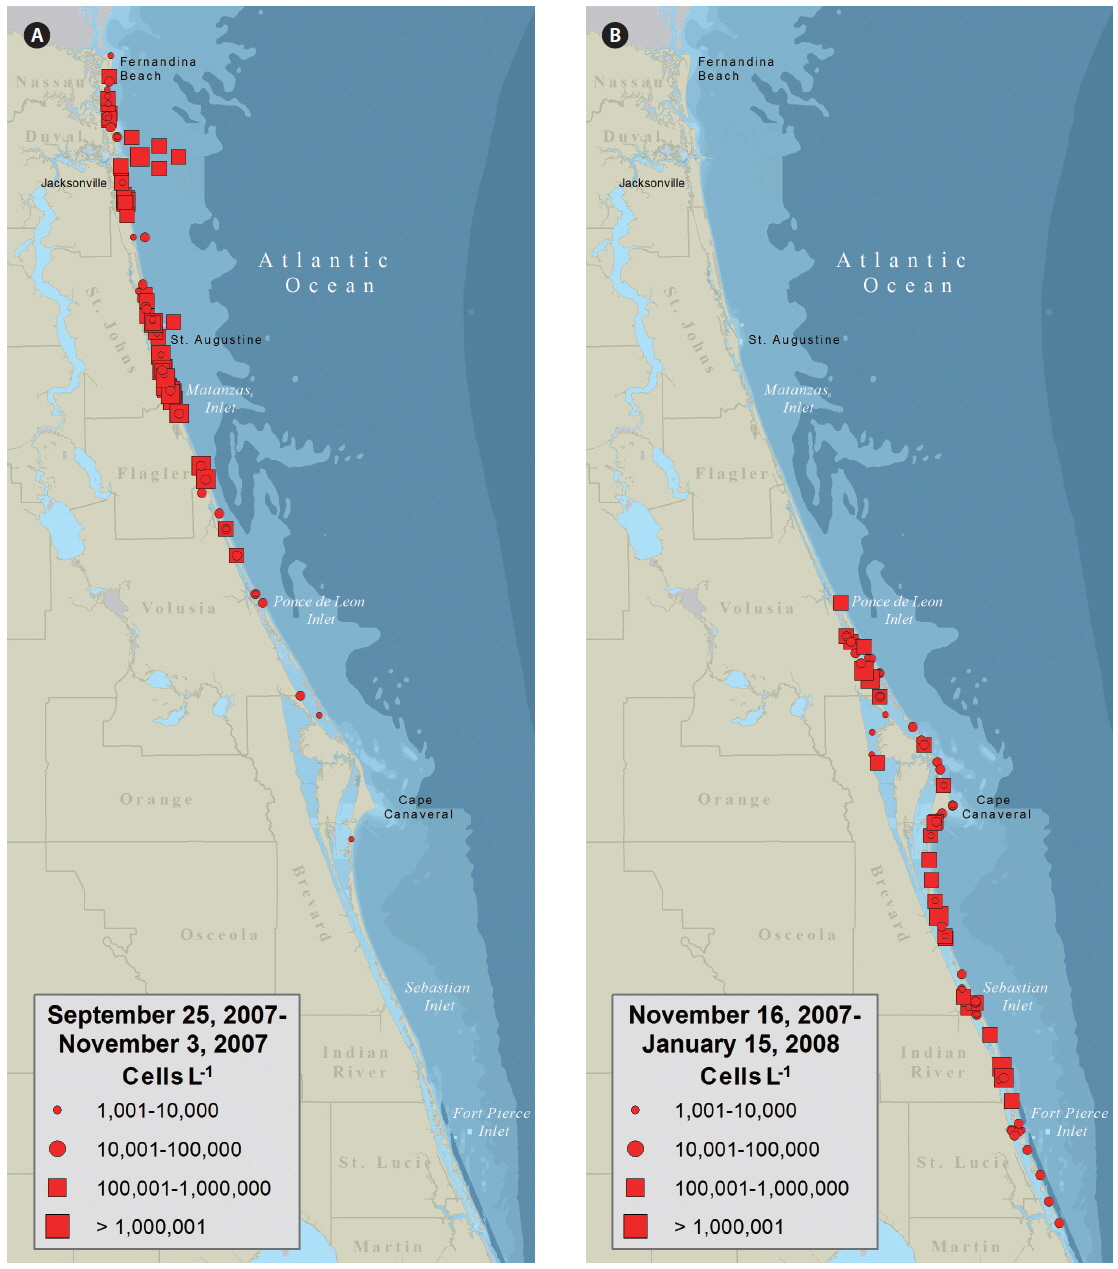 Progression of the Karenia brevis red tide along the east coast of Florida from September 25, 2007 through January 15, 2008. (A) Cell concentrations of K. brevis for September 25 through November 3, 2007. (B) Cell concentrations of K. brevis for November 16, 2007 through January 15, 2008. Data points represent analysis of 800 individual water samples.